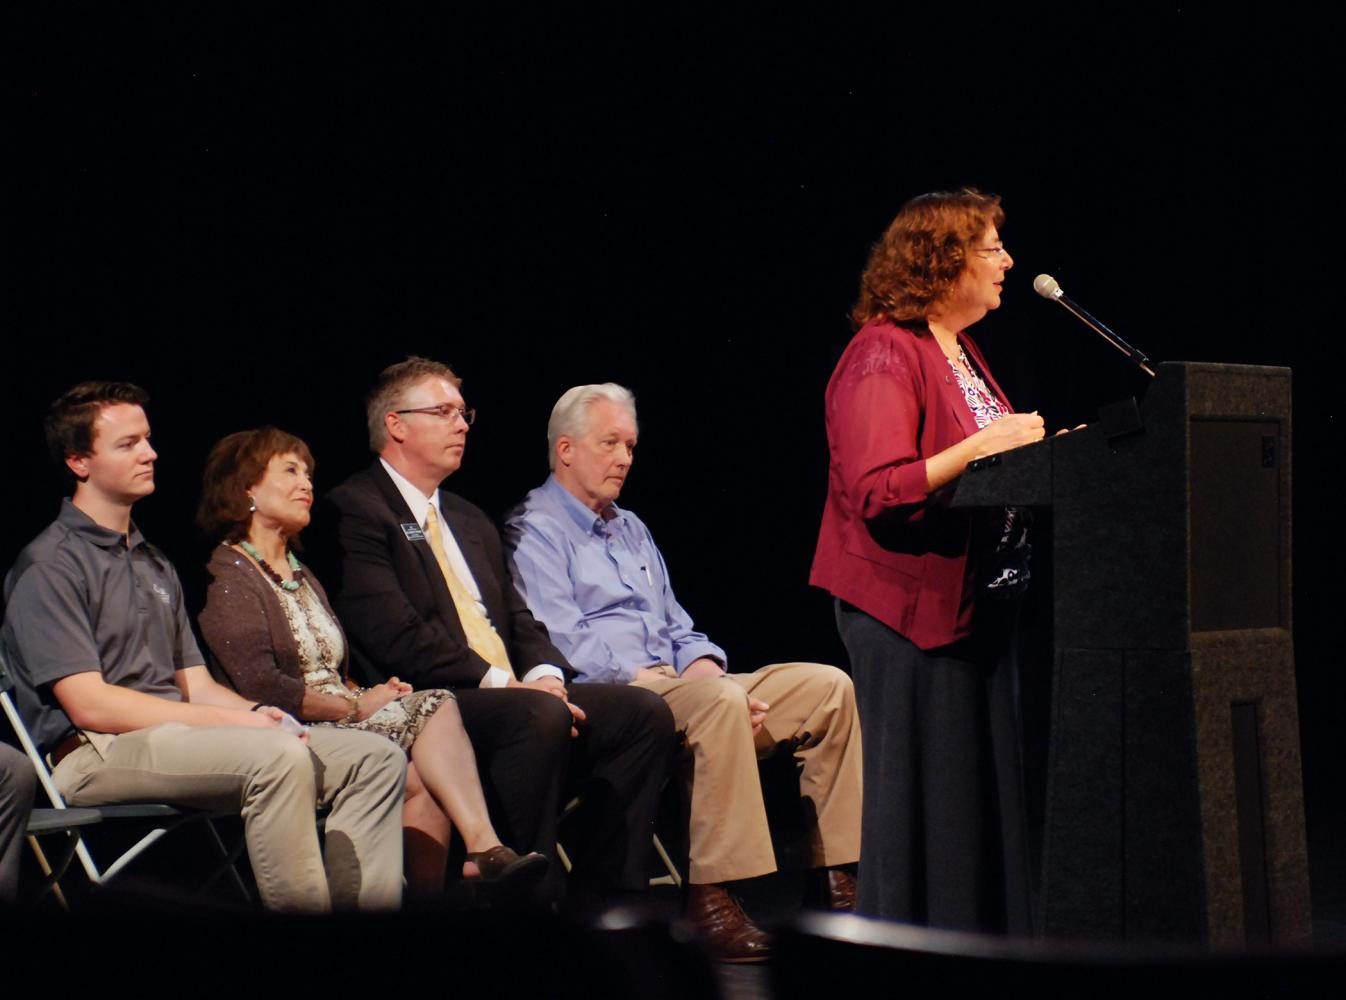 Erica Austin, Vice Porovost for Academic Affairs, relays a speech with the audience regarding a new campus location for Spokane Falls Community College at the WSU Pullman campus on Thursday September 7th in the Wadleigh Theatre. 